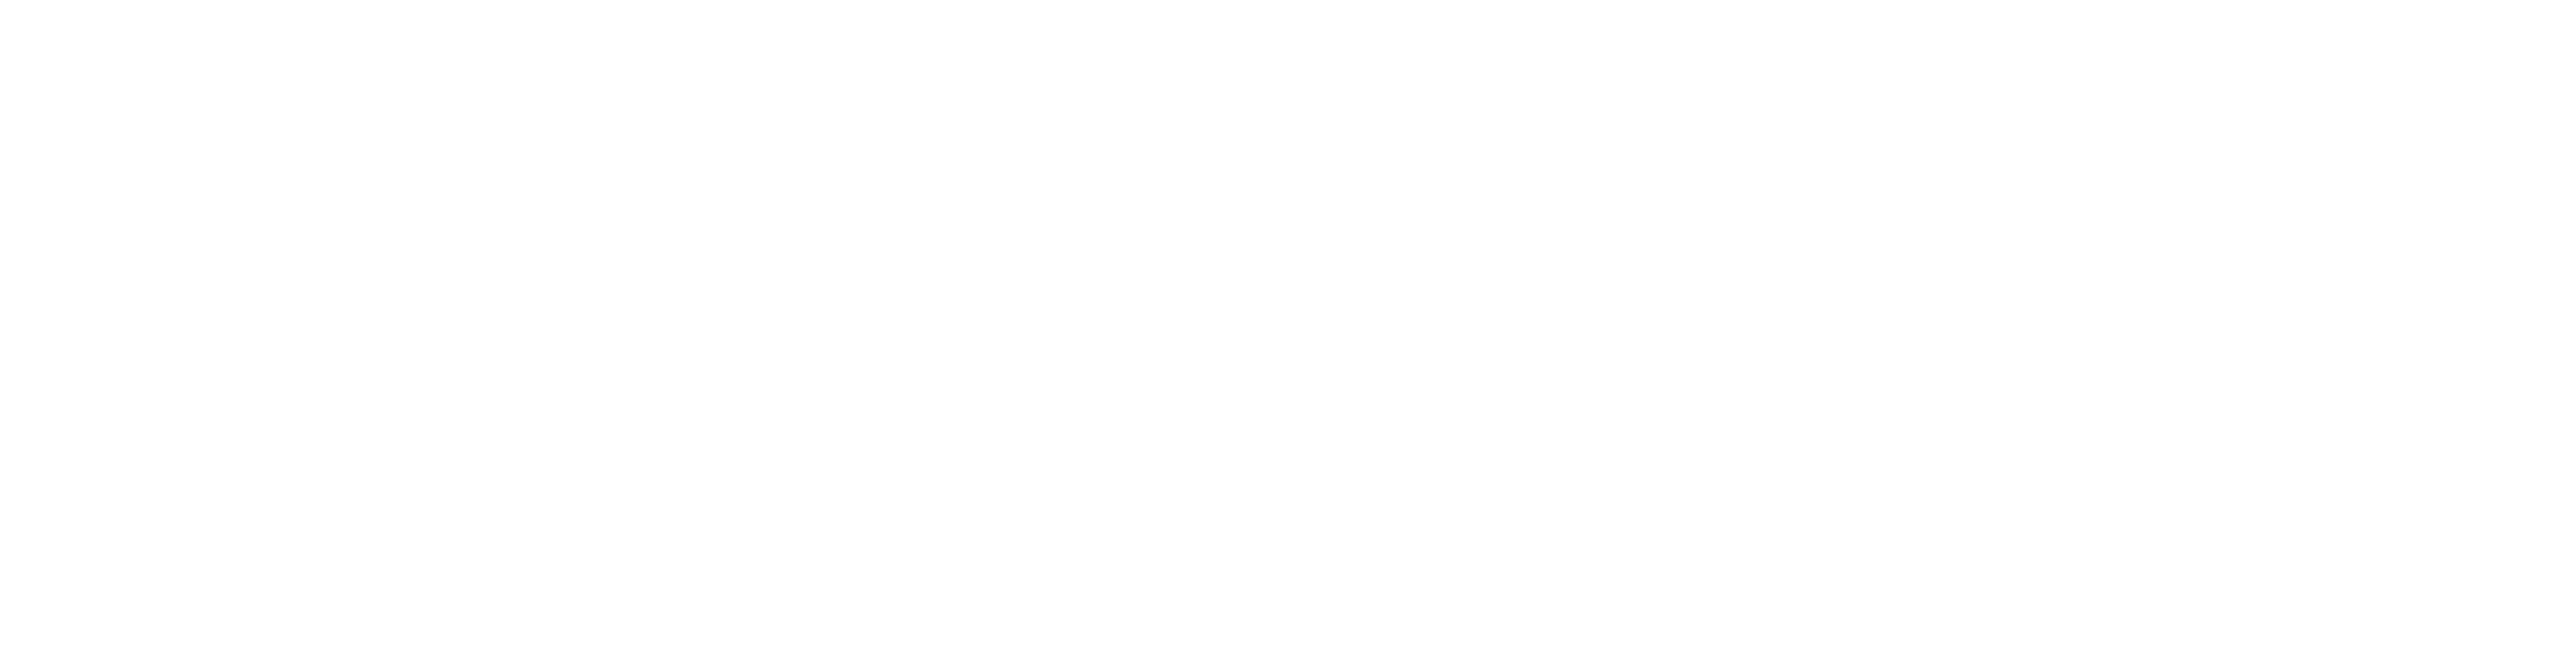 Rail freight the future is ours